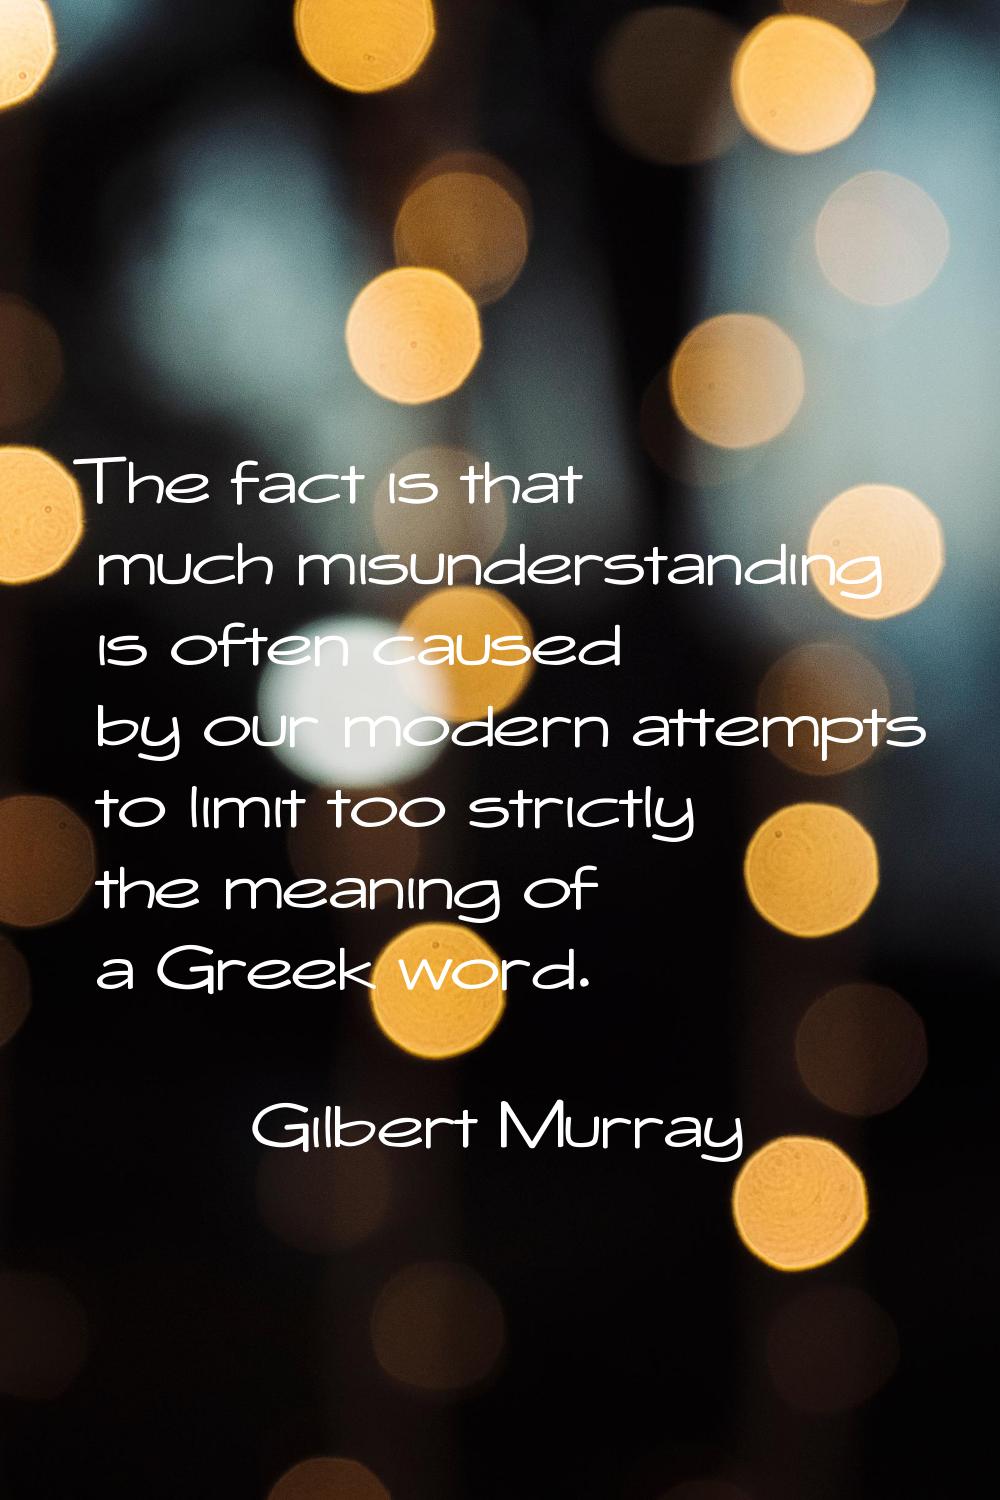 The fact is that much misunderstanding is often caused by our modern attempts to limit too strictly